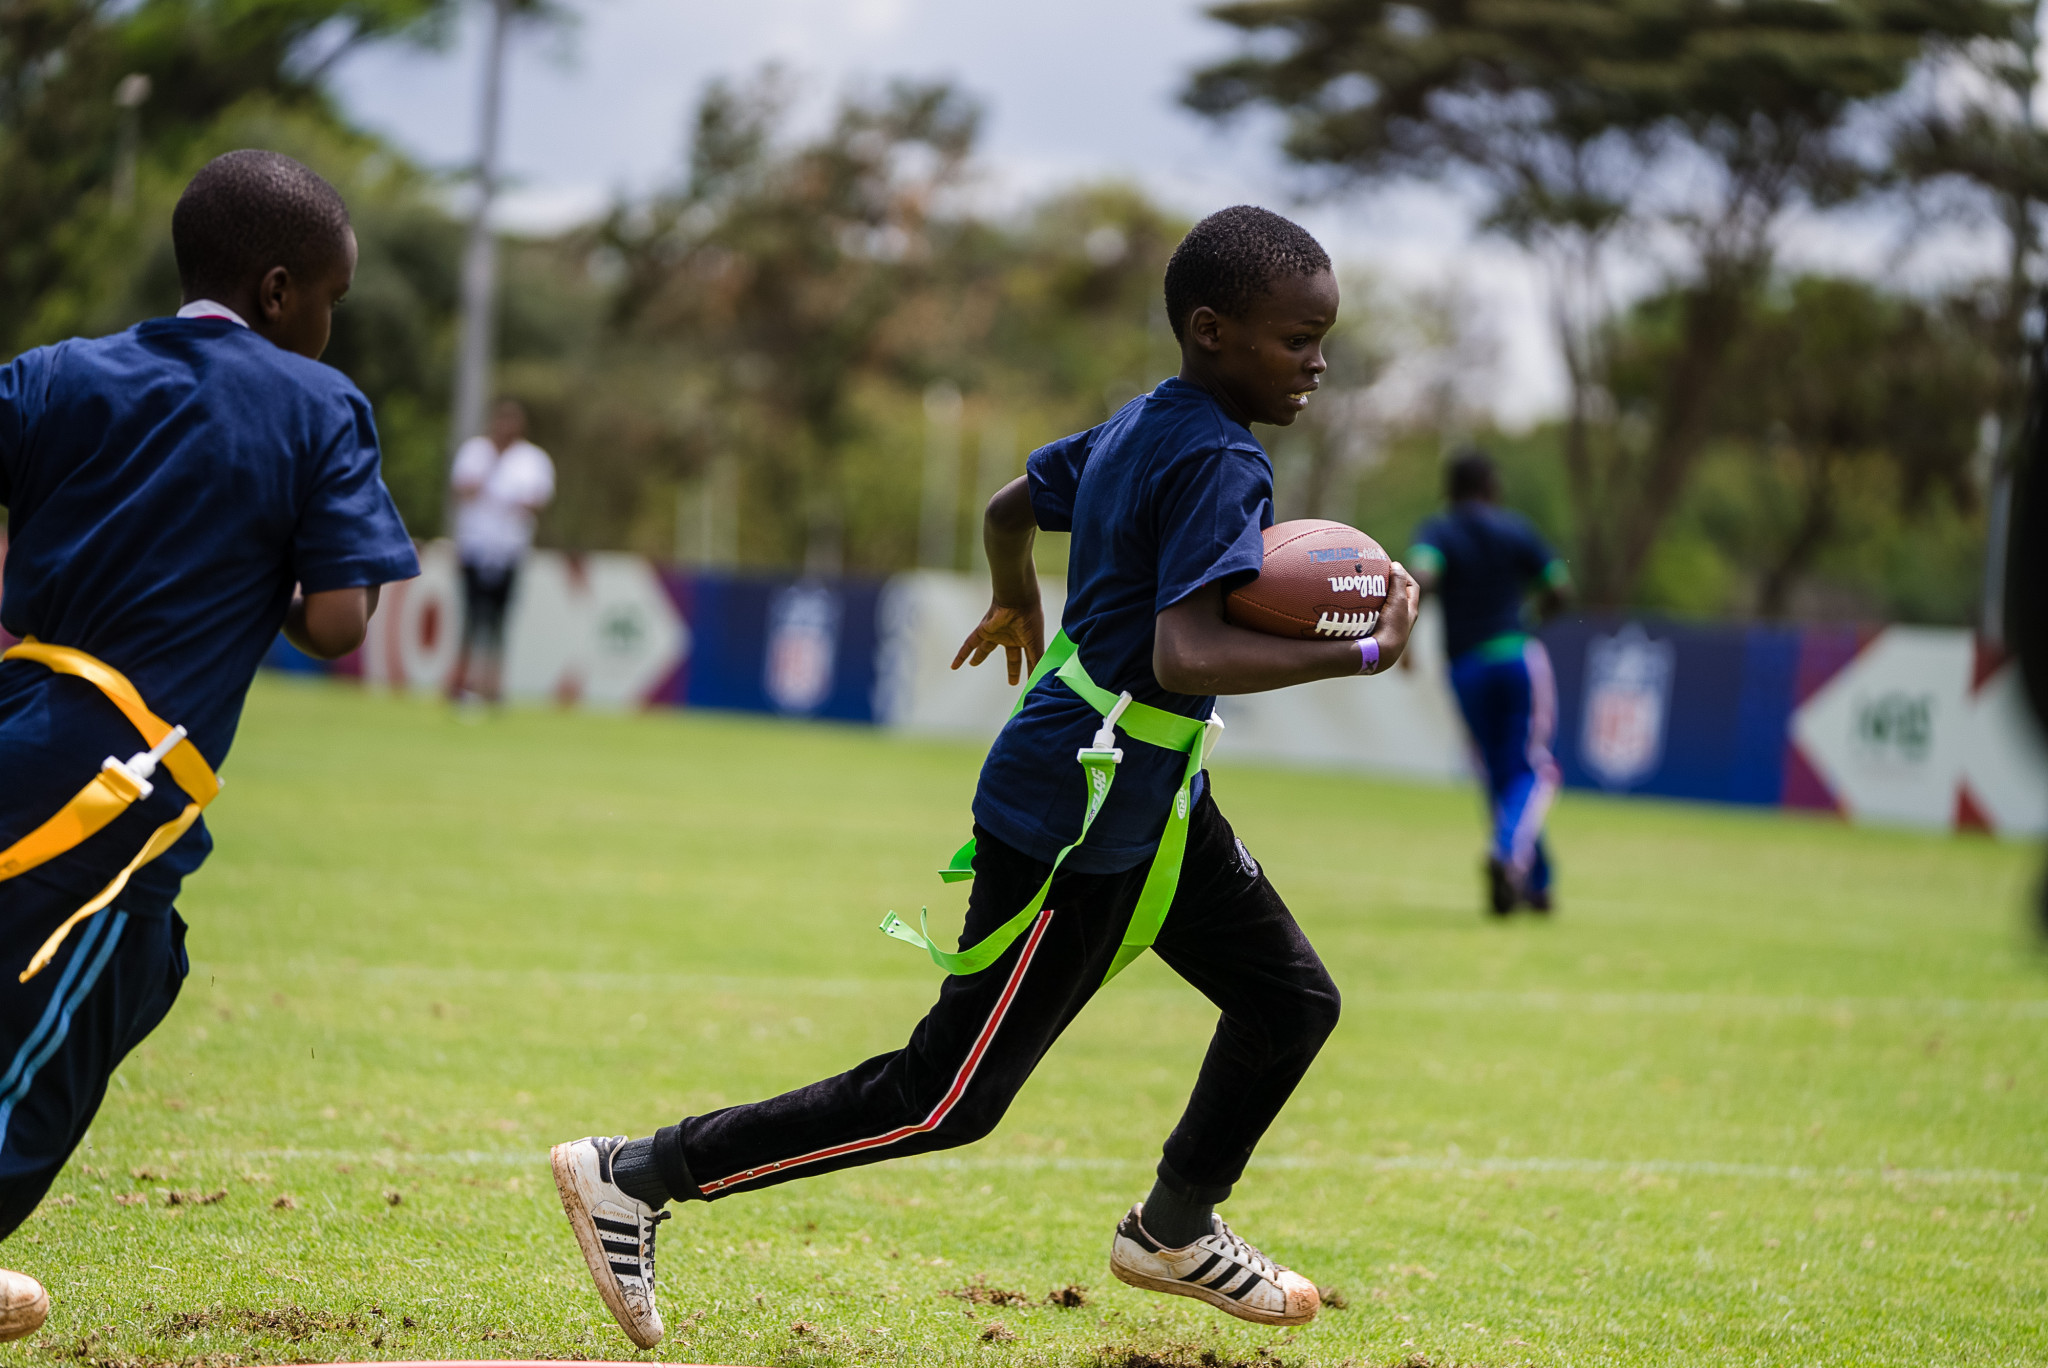 The sessions are hoped to contribute to IFAF's attempts to have flag football included in the Los Angeles 2028 Olympic Games ©NFL